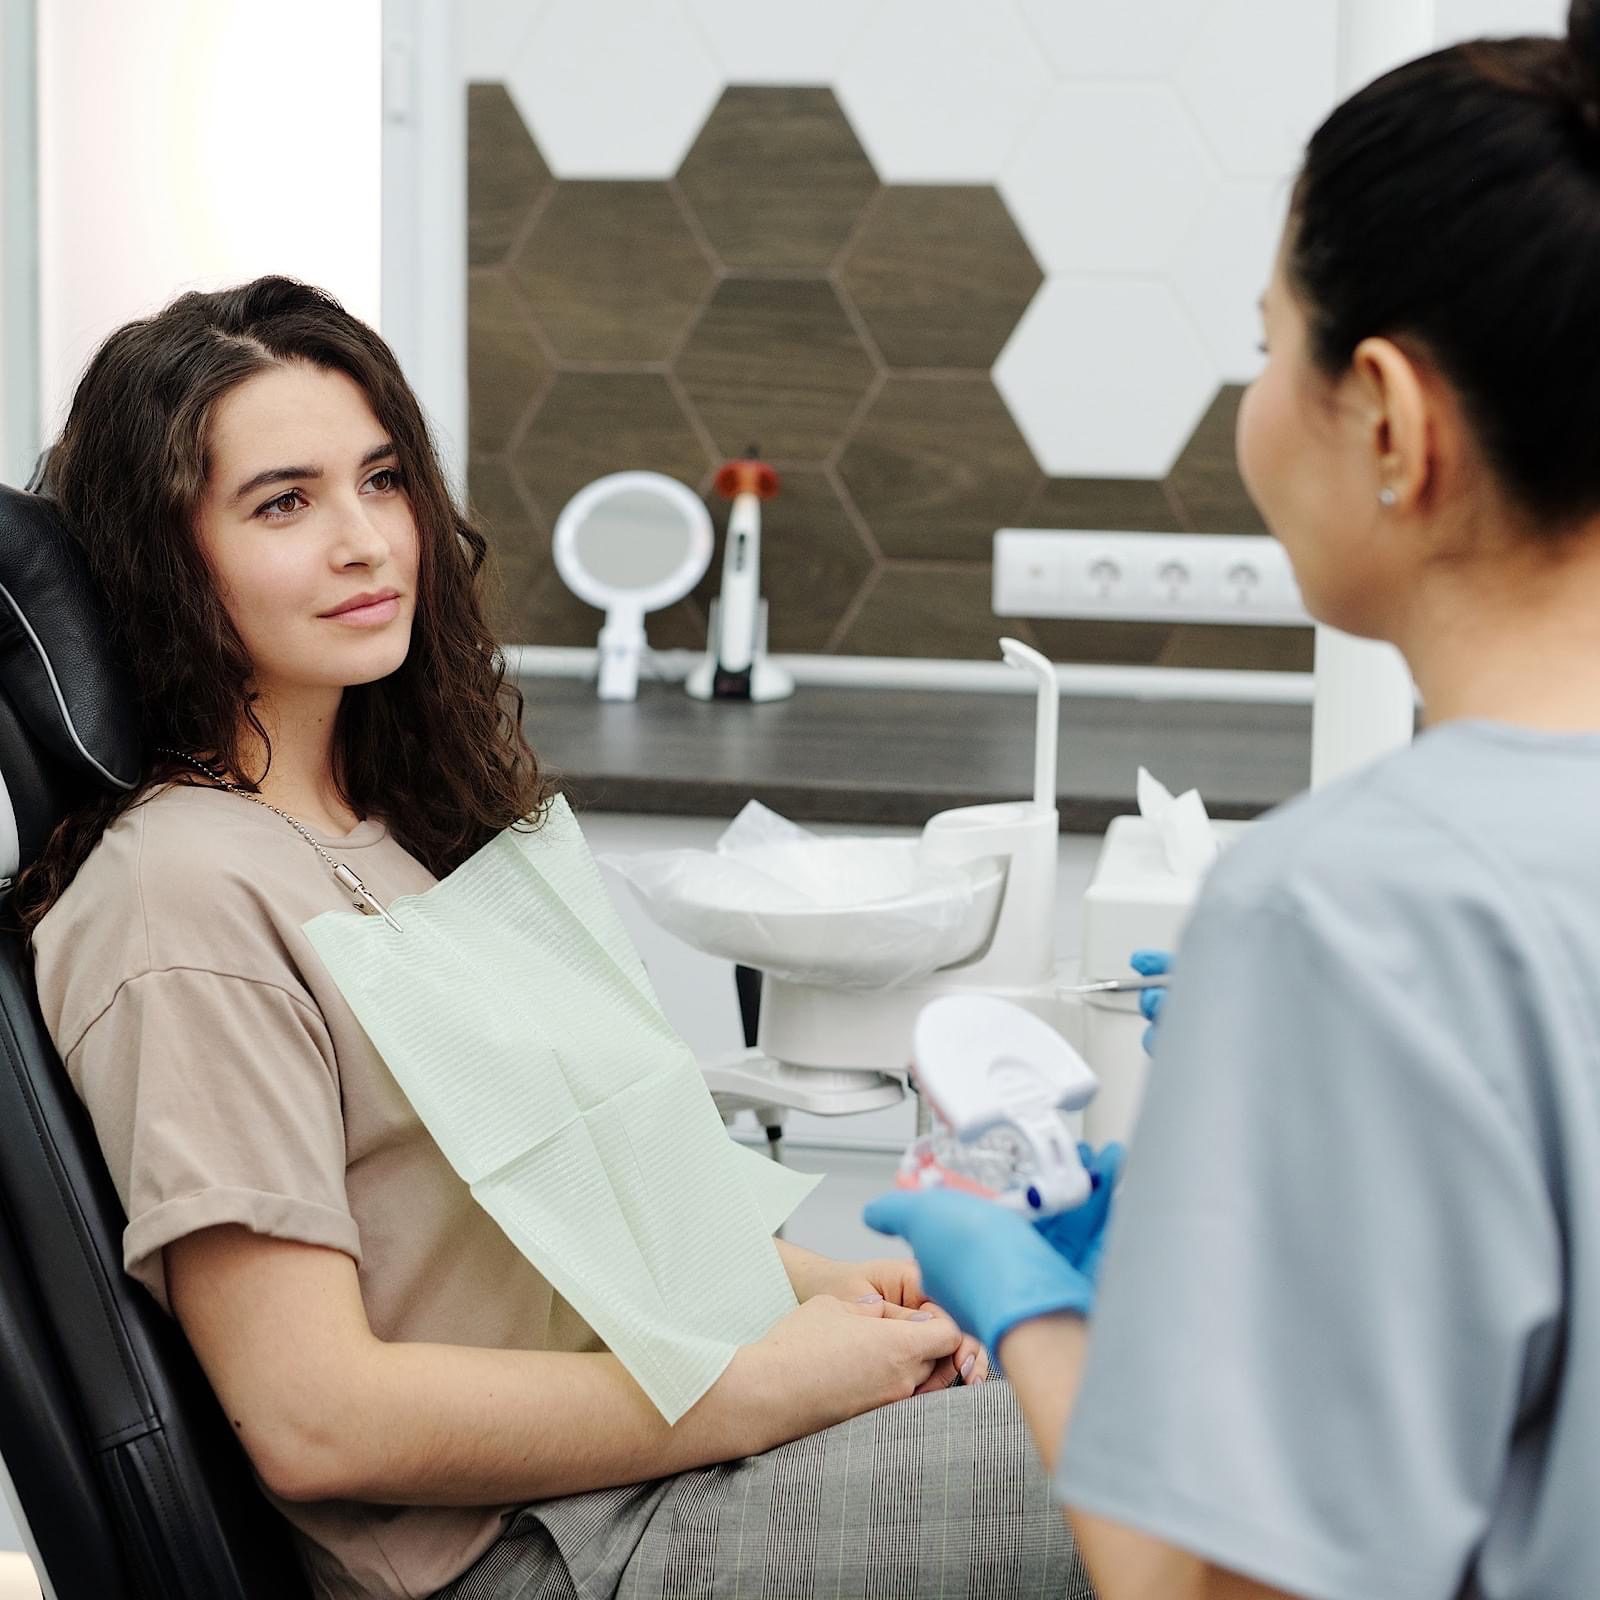 Why You Shouldn’t Wait to Detect Oral Health Problems: The Benefits of Early Detection